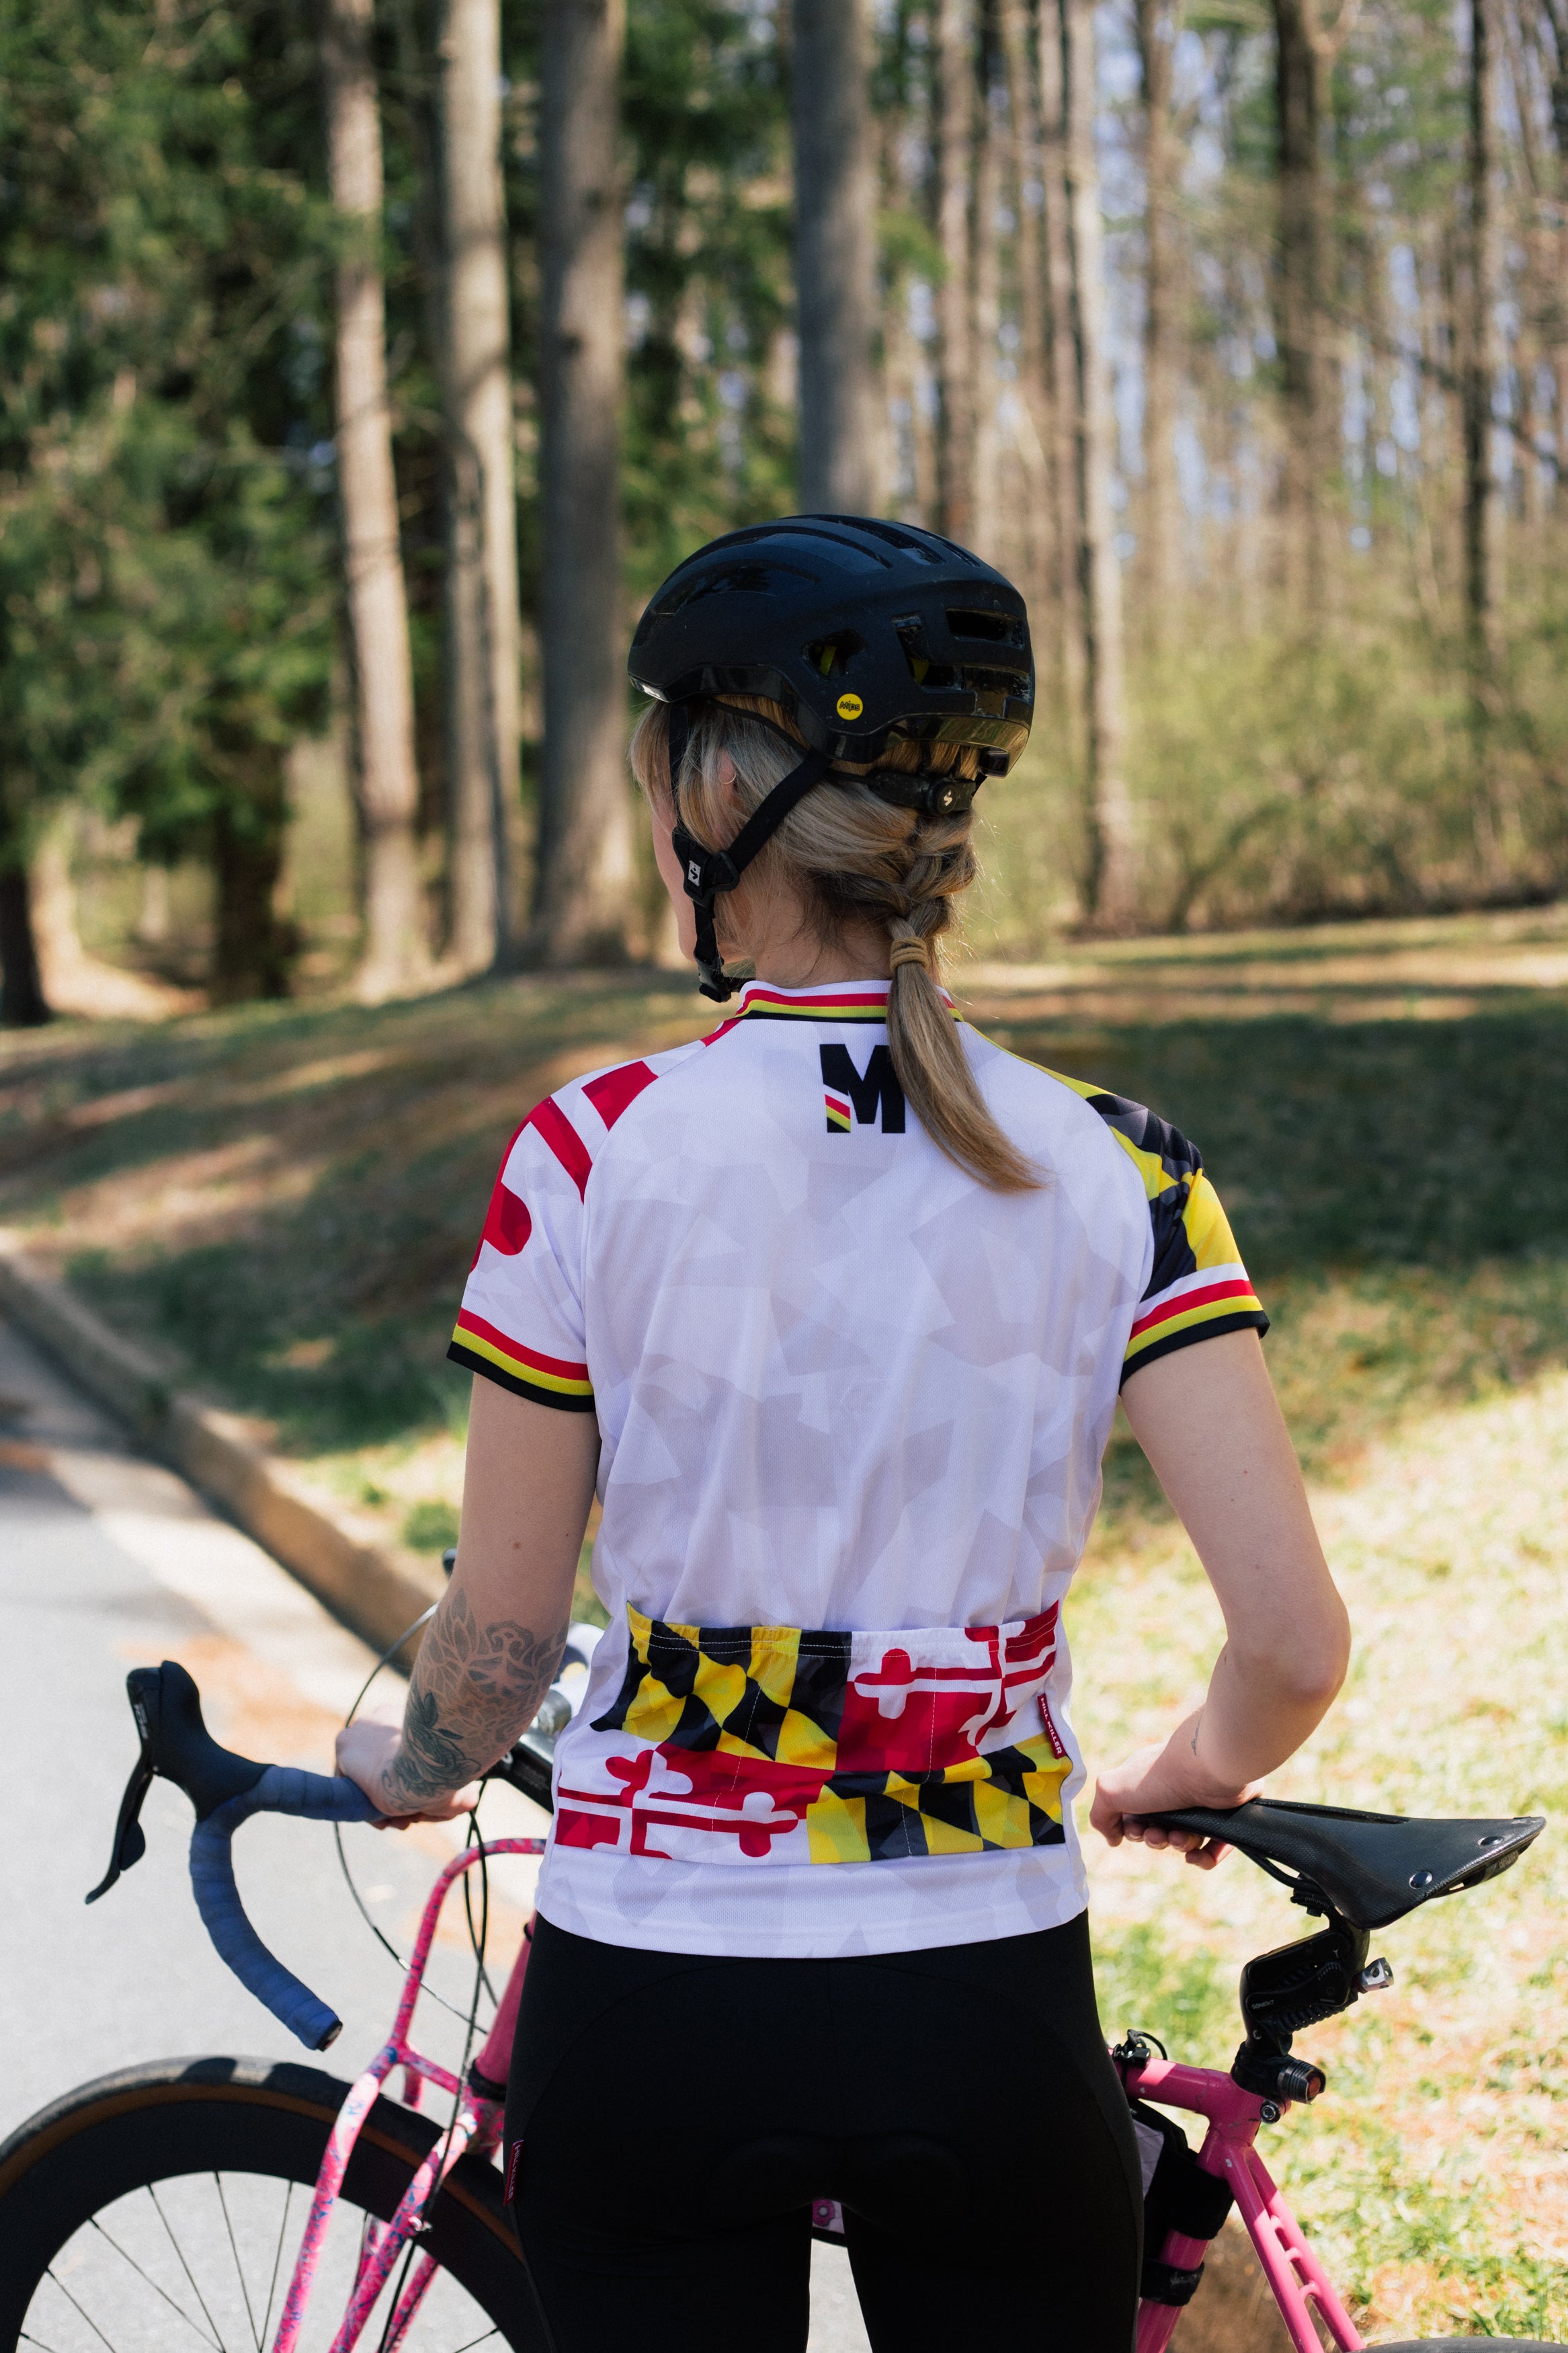 Maryland Recon White Jersey